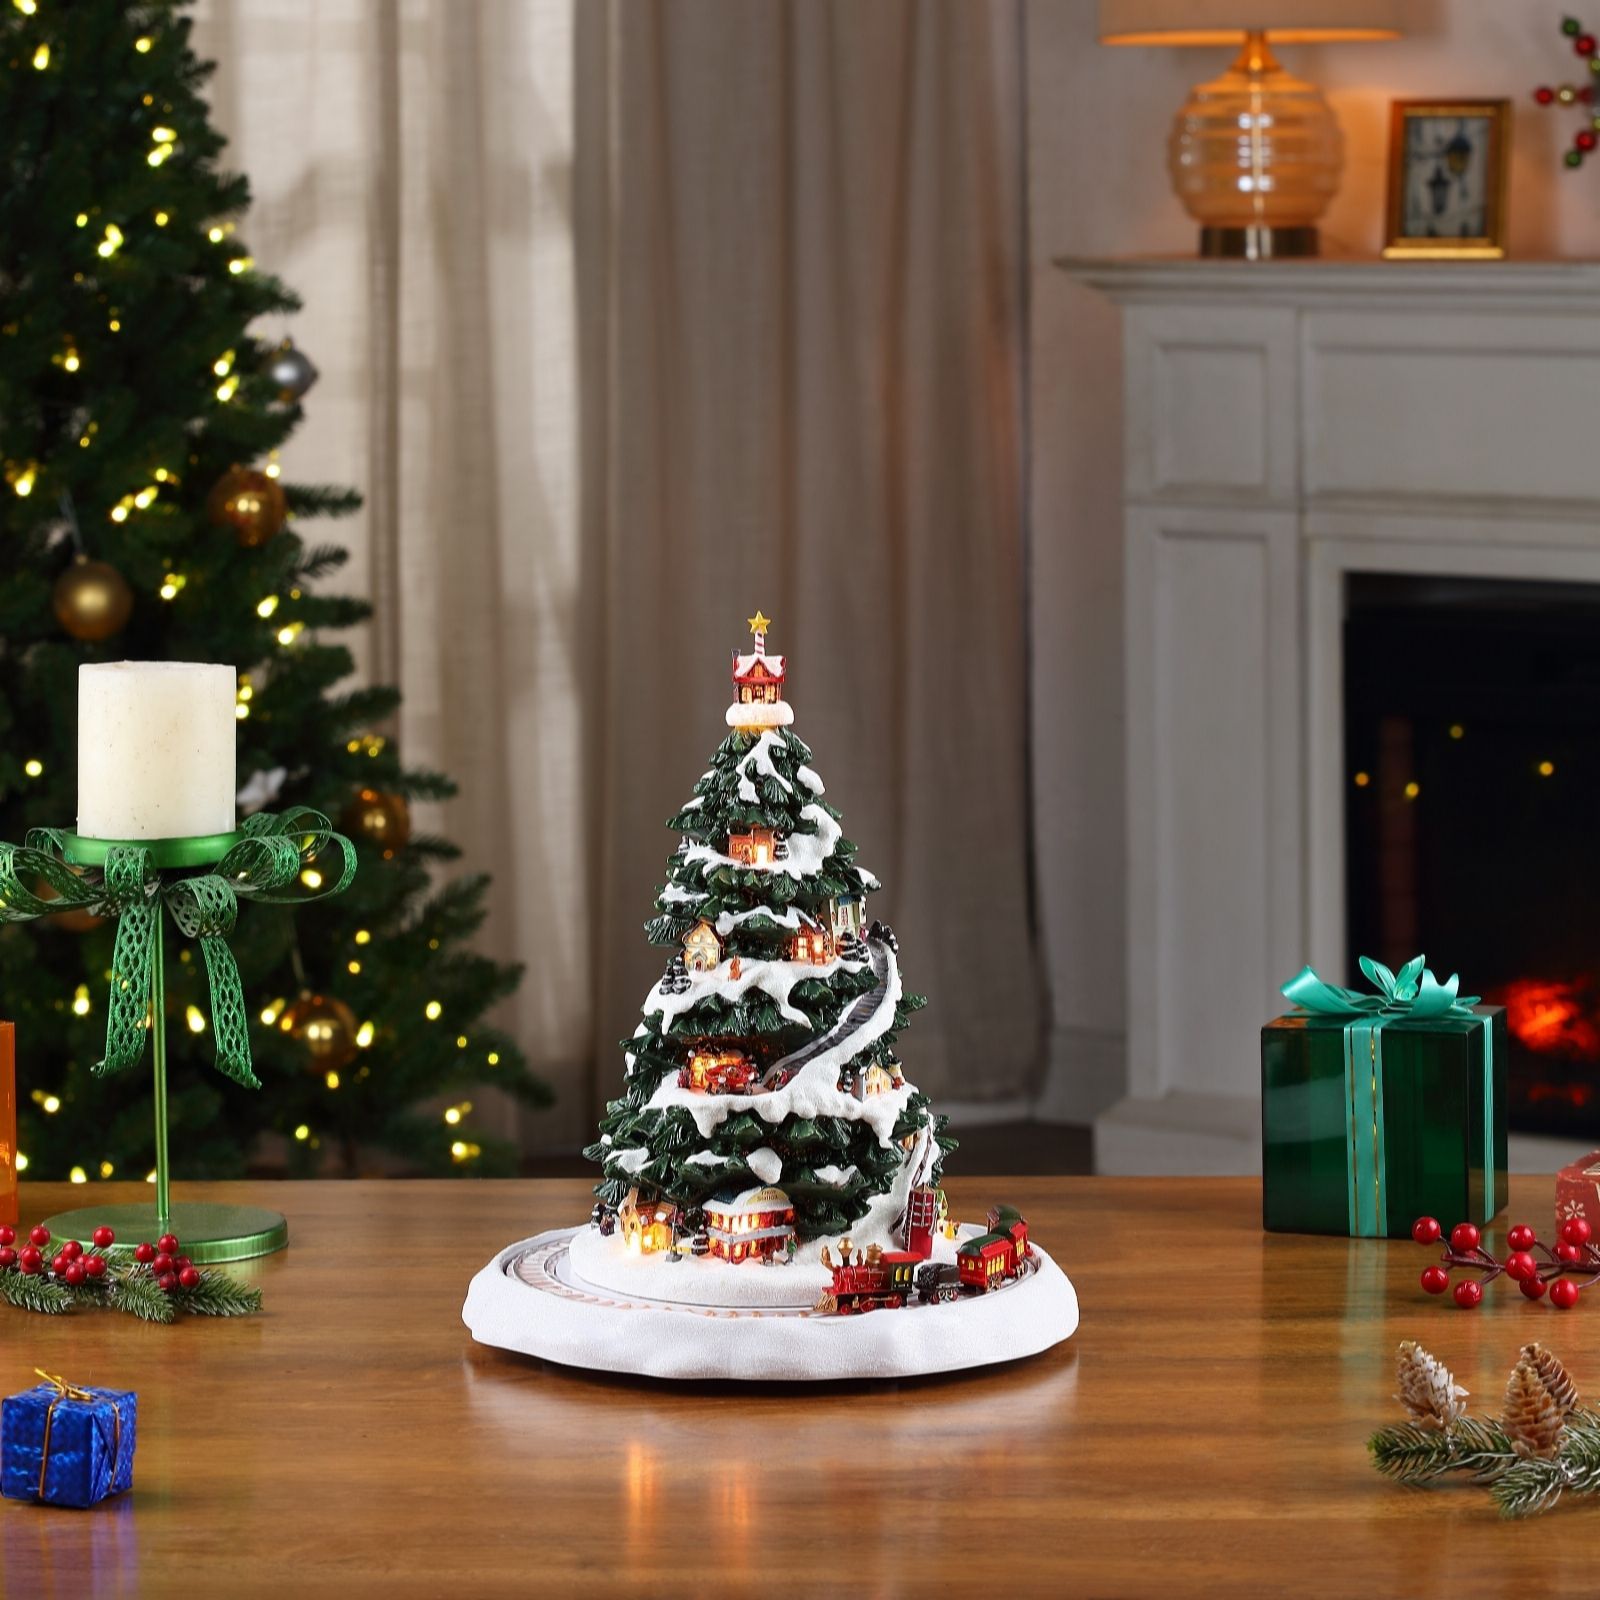 Outlet Mr Christmas 90th Anniversary Christmas Eve Express Tree - QVC UK